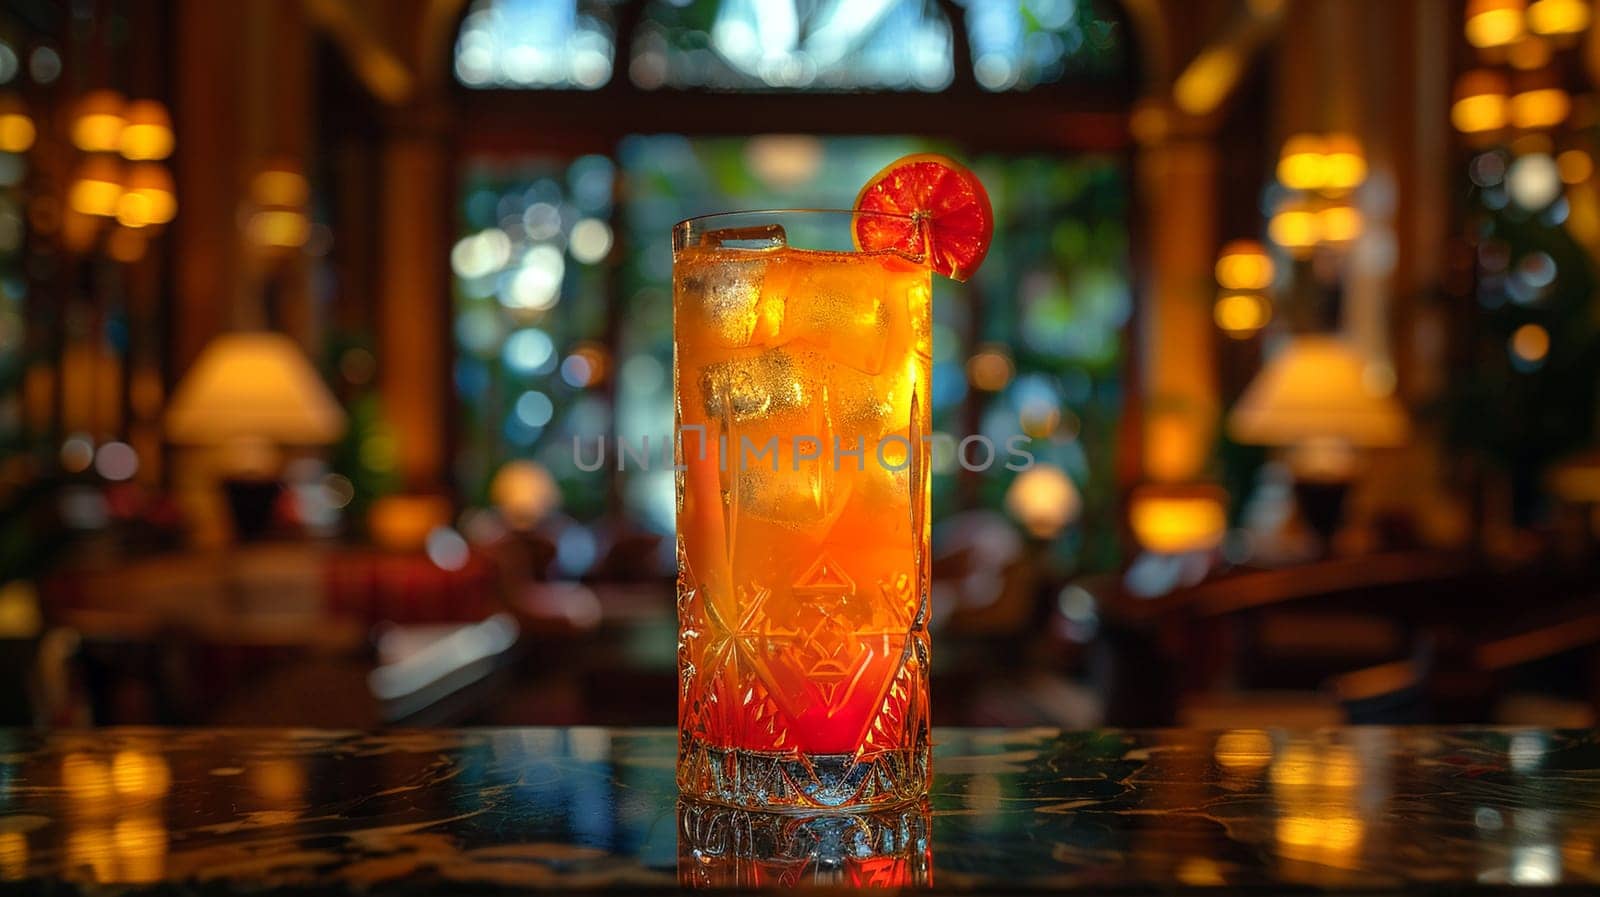 Singapore Sling served at the historic Raffles Hotel, paying homage to its birthplace.